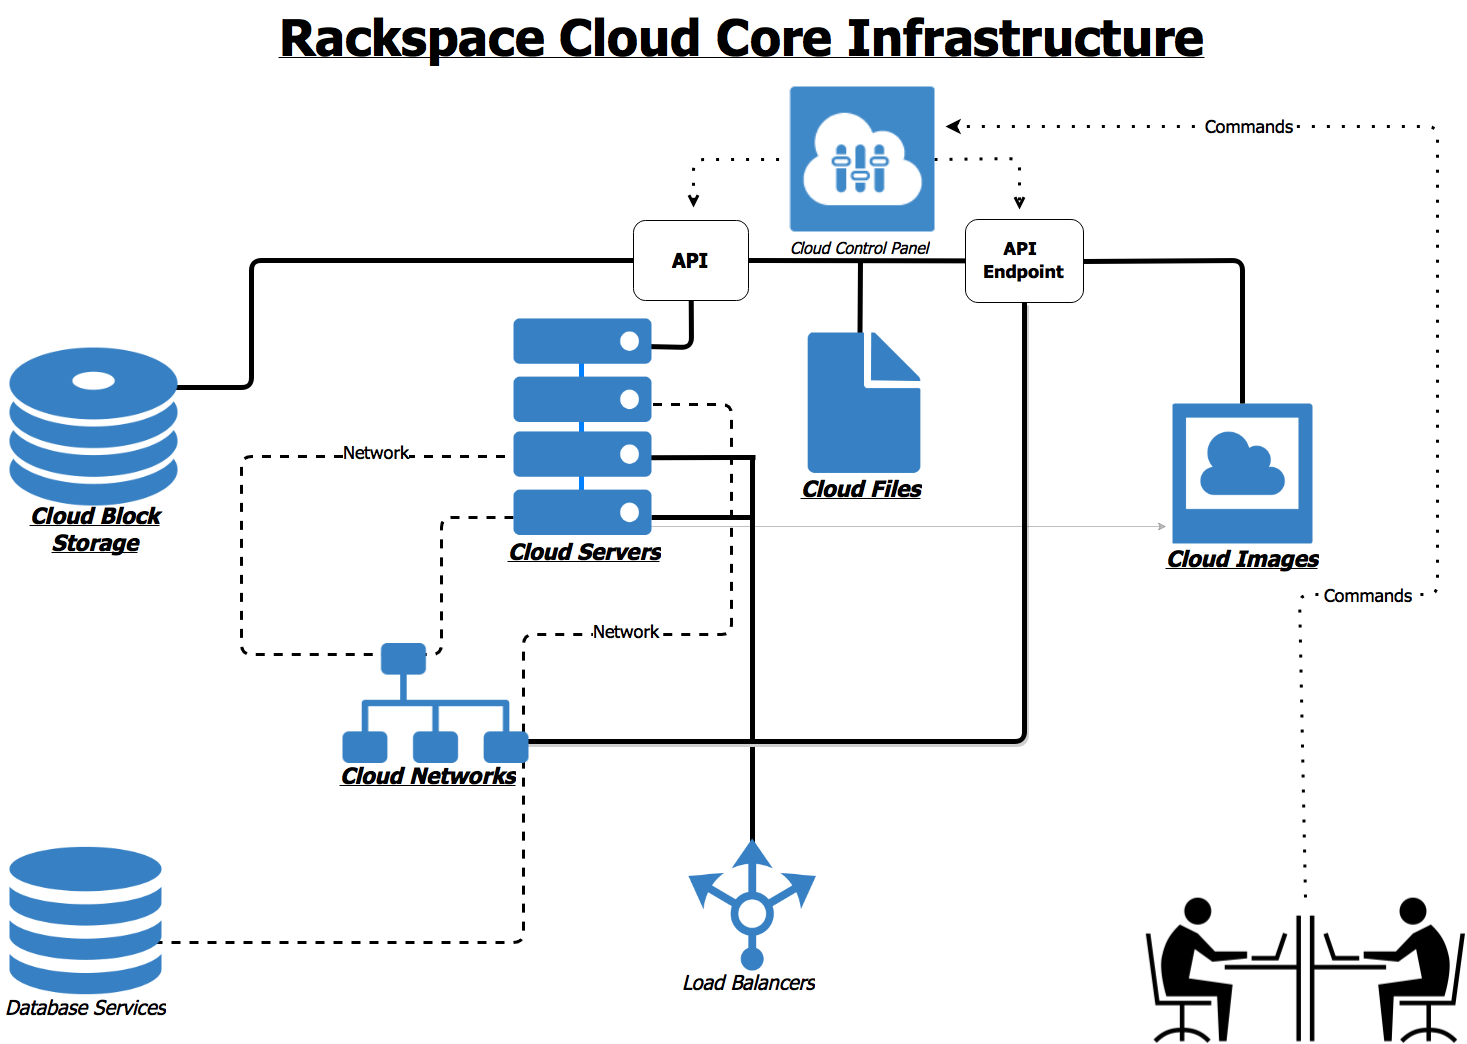 Cloud Servers, Cloud Networks, Cloud Images, Cloud Block Storage, and Cloud Files are the Rackspace cloud's core infrastructure. From the Cloud Control Panel, you can send a request to the API for a cloud service. The service processes your request.*